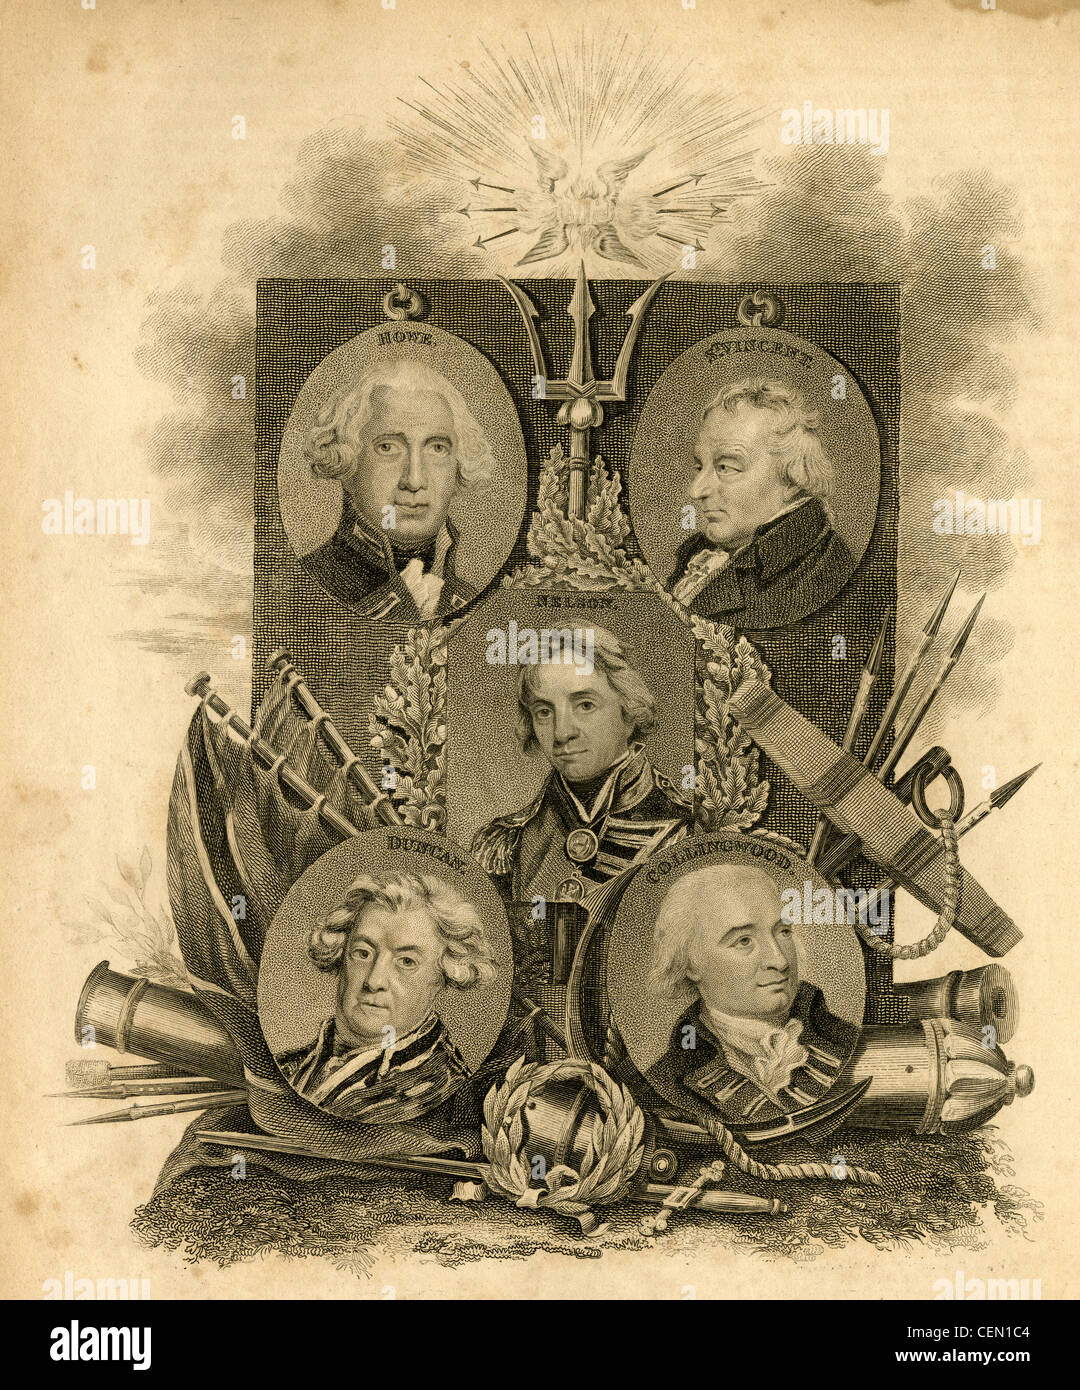 1816 engraving, British Admirals of the early 19th century. Stock Photo